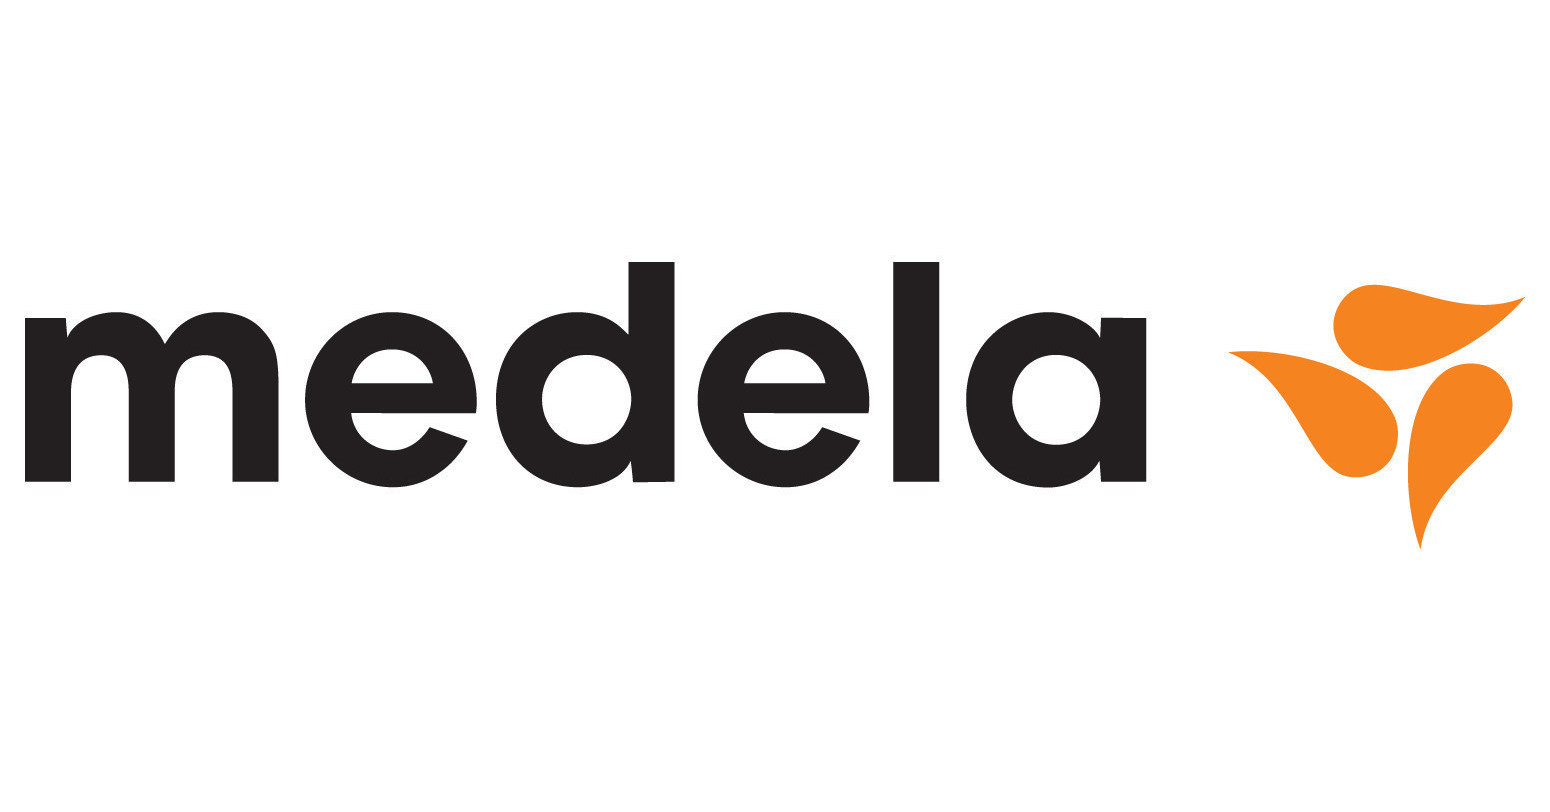 Medela opens New Production Line in the US and more than Triples Production  in Switzerland of Critical Portable Suction Systems Aiding Hospital  Ventilator Support and Patients with COVID-19